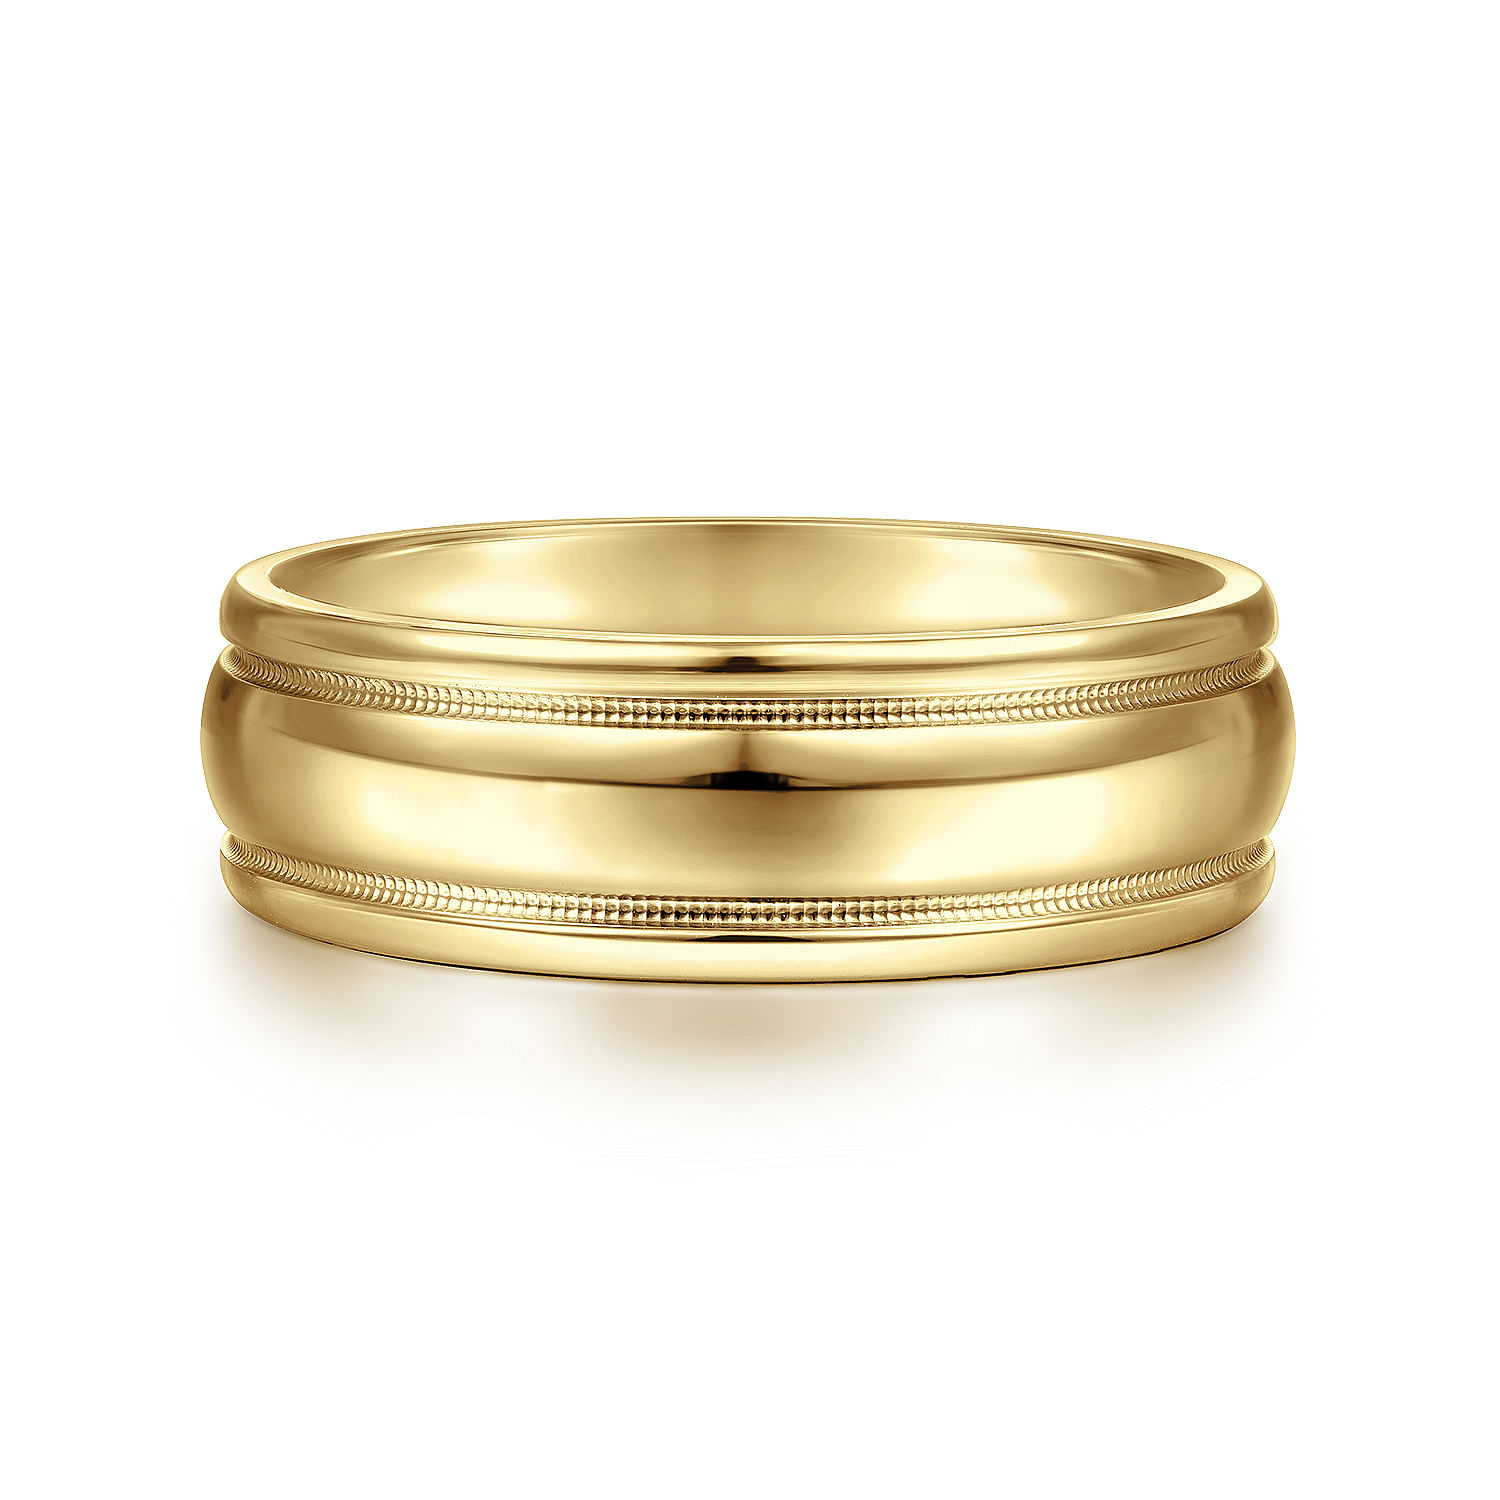 14K Yellow Gold 7mm - Men's Wedding Band in High Polished Finish